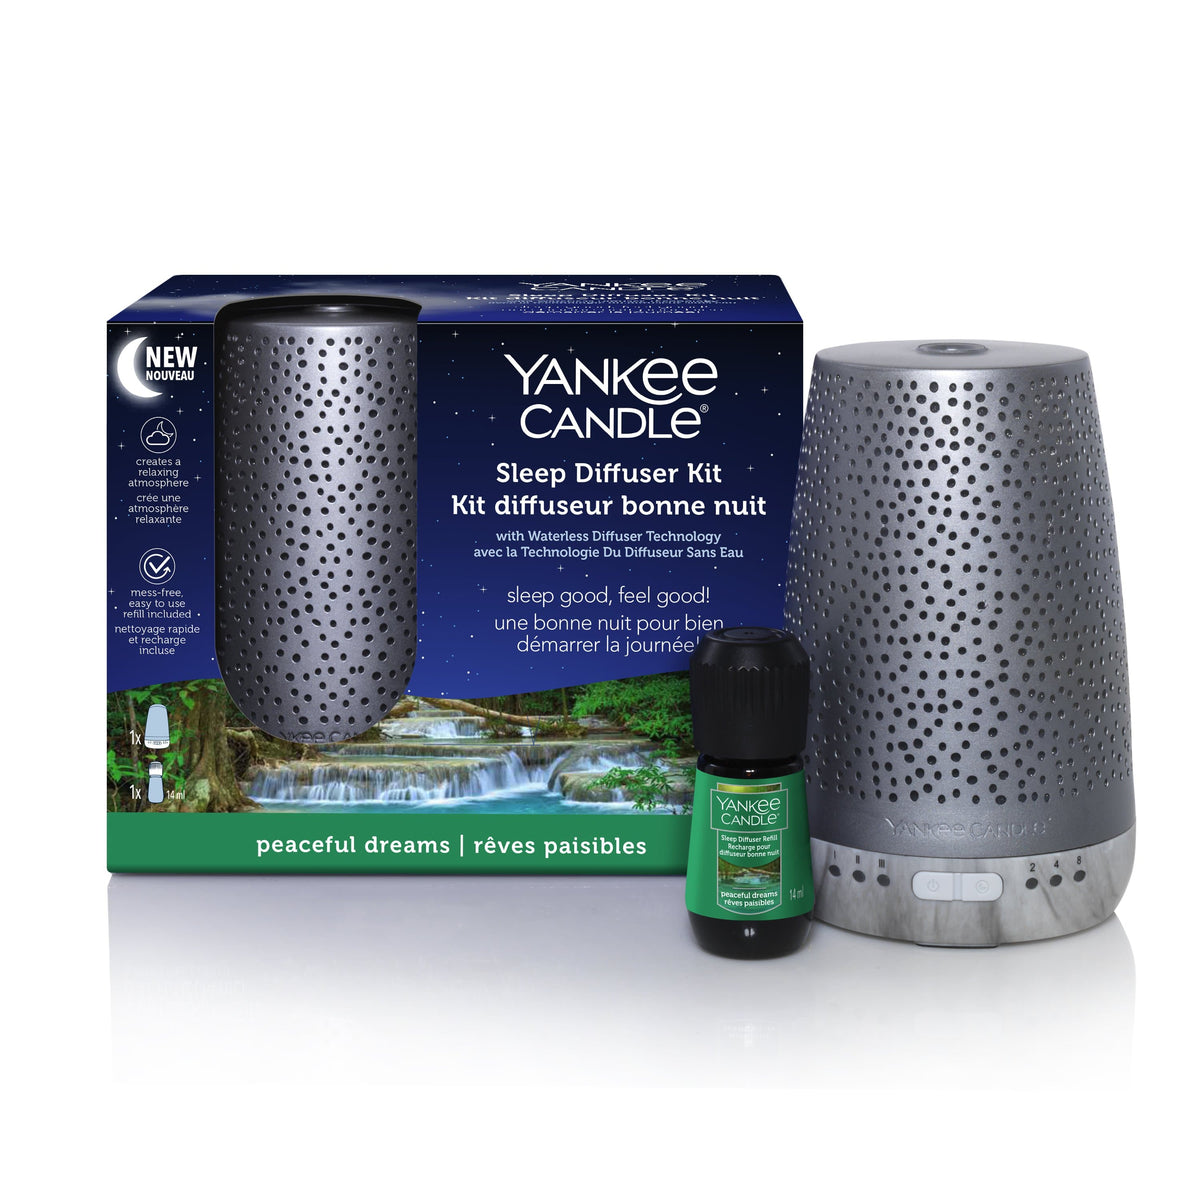 Yankee Candle Sleep Diffuser Silver Starter Kit & Peaceful Dreams Curios Gifts